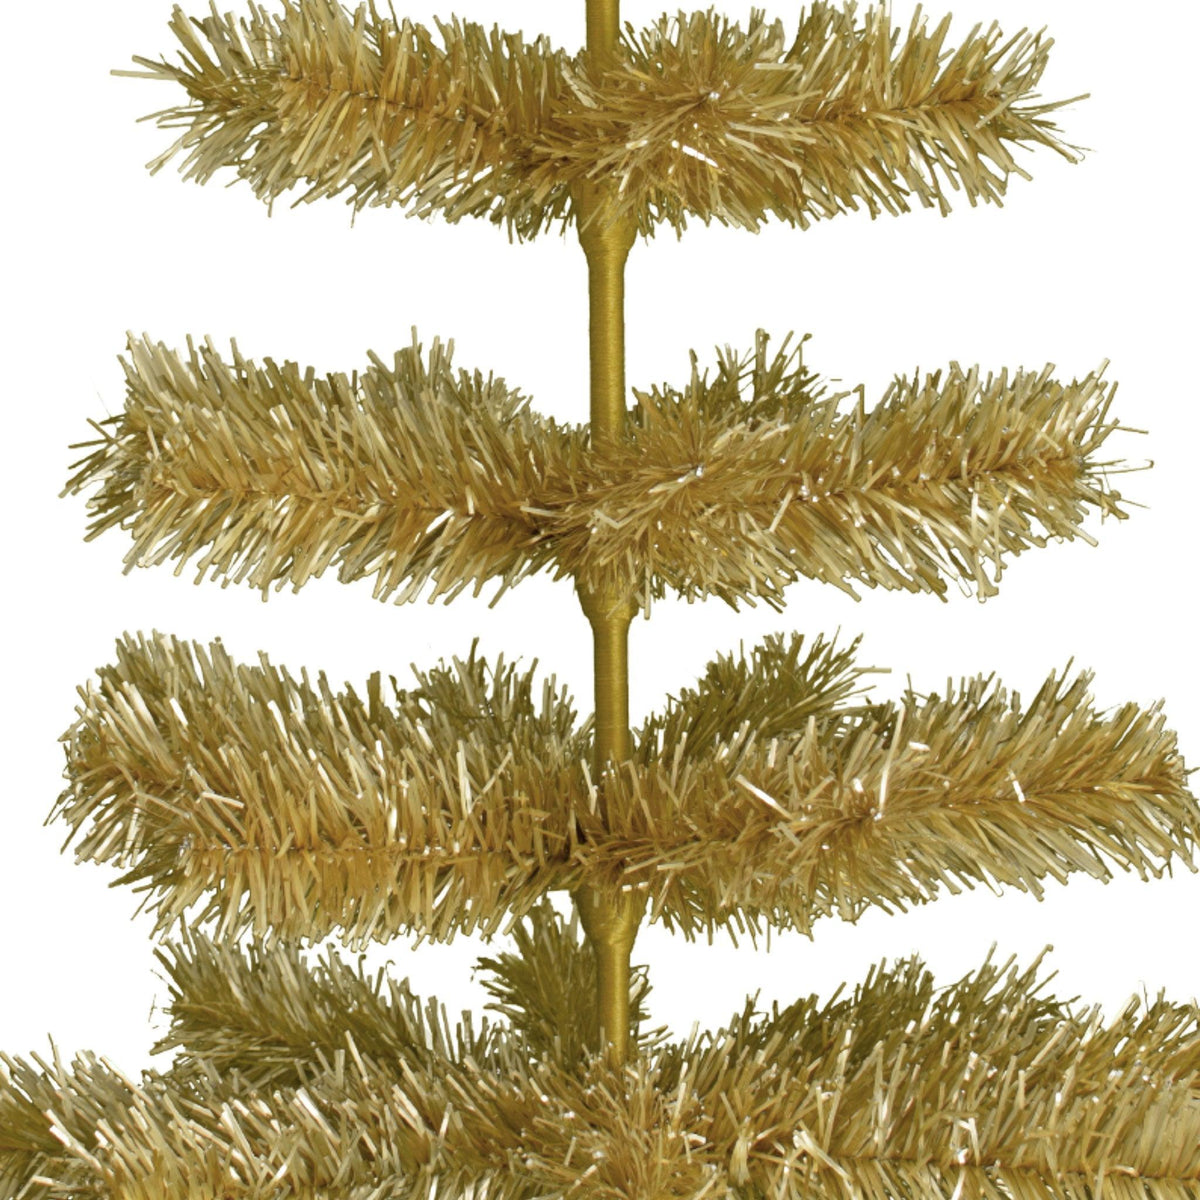 Our 36in Tall Antique Gold Christmas Tree.  Celebrate Lee Display's 120th Anniversary with our brand new Antique Gold colored tinsel Christmas Trees.  Shop for antique gold christmas trees at leedisplay.com